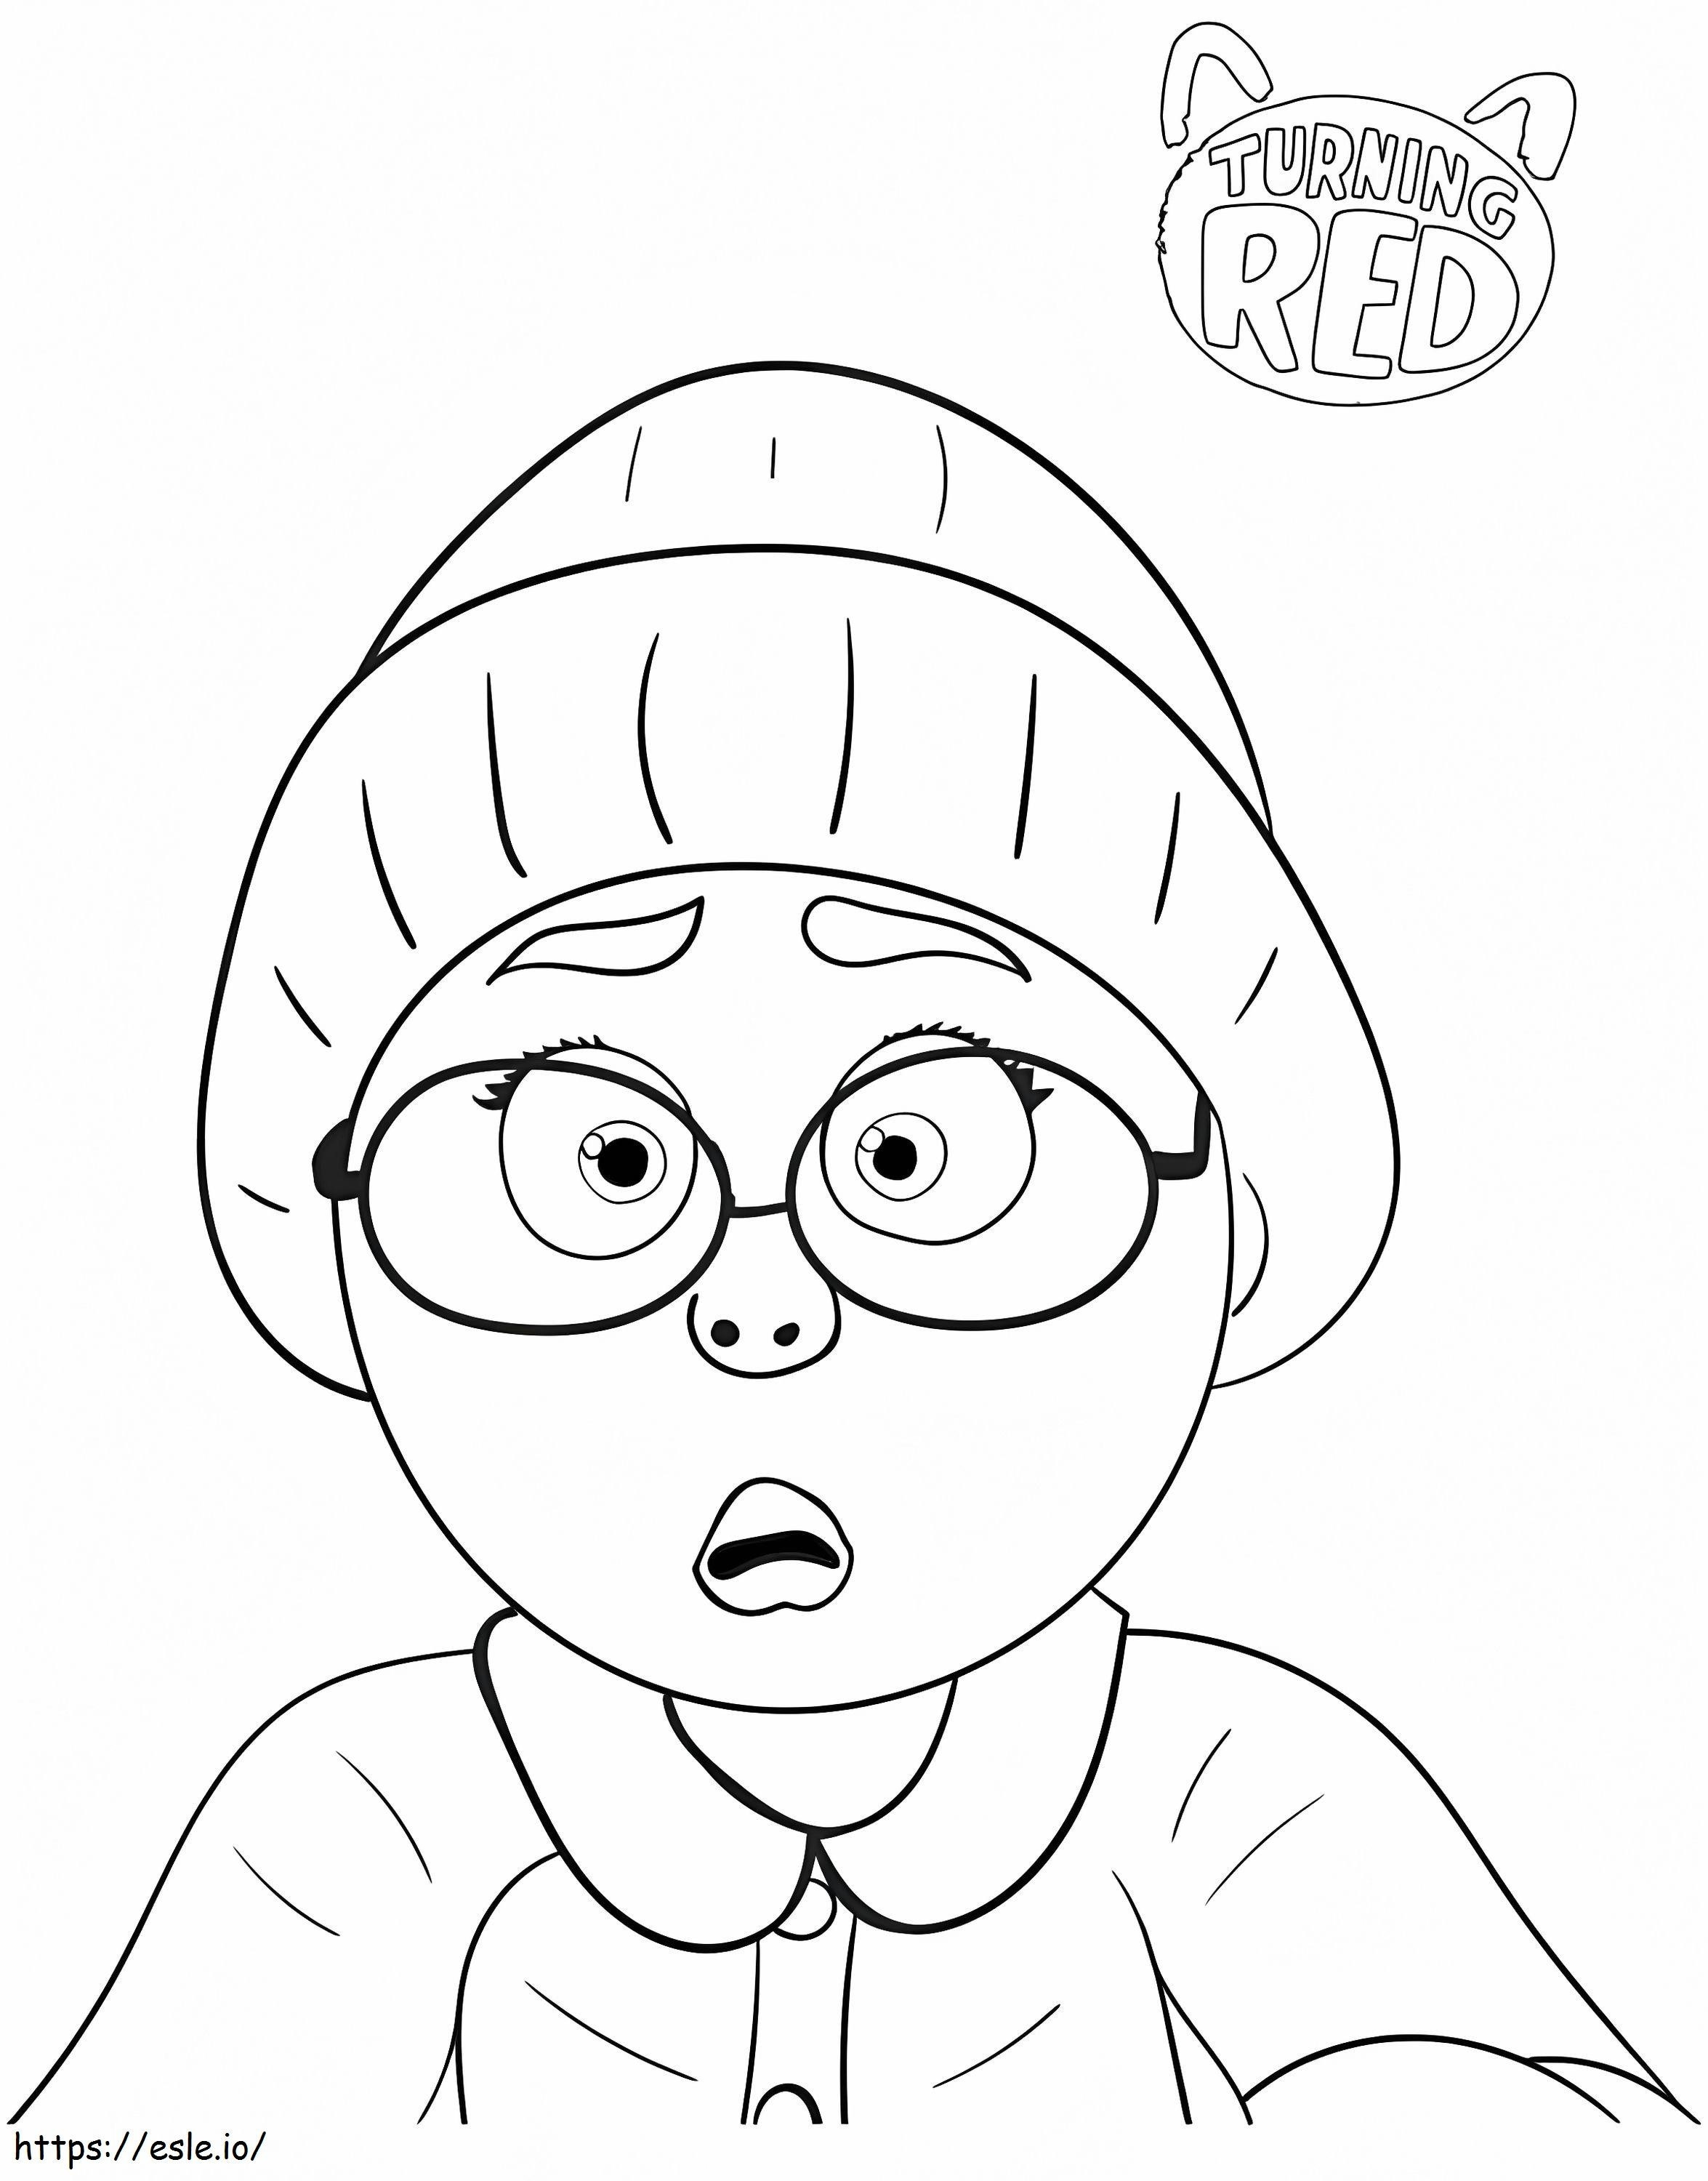 Turning Red 5 coloring page